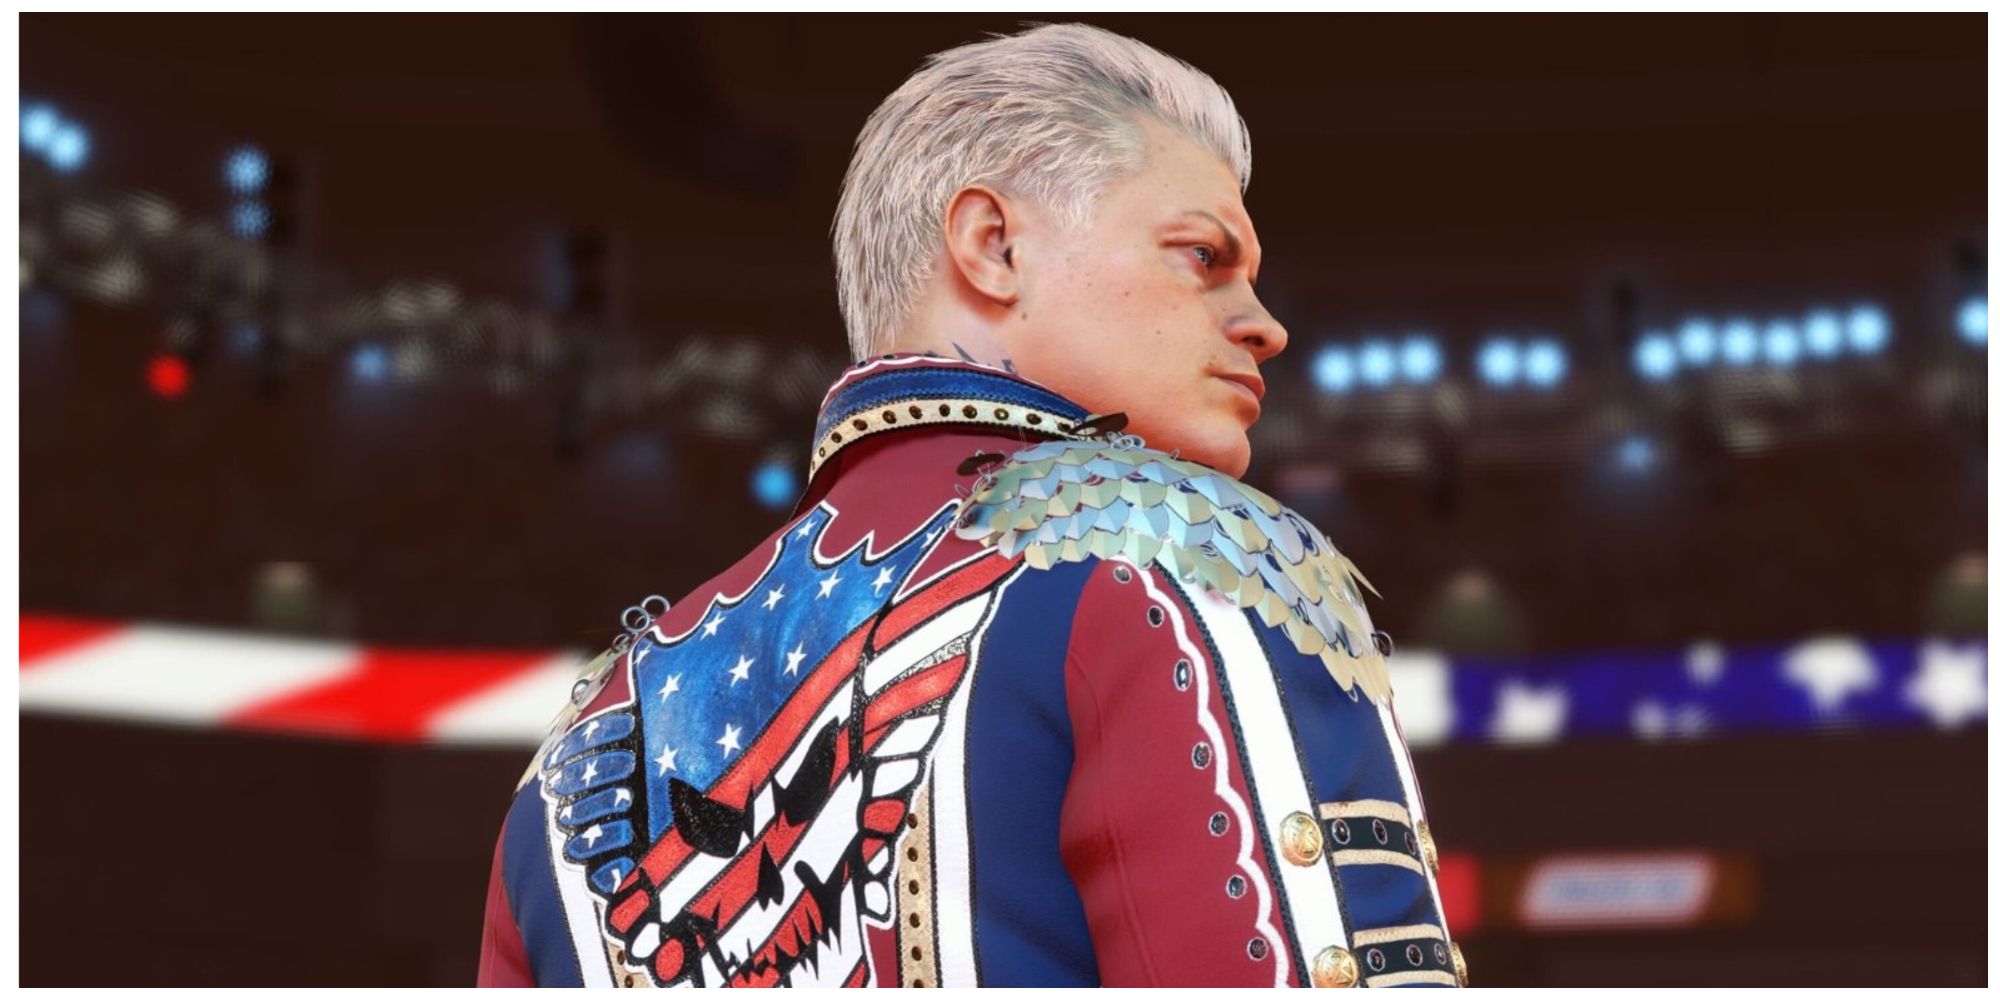 Cody Rhodes with his back turned and head to the right. He is wearing his red, white, blue and gold robe with his American Skill logo on the back in WWE2K23